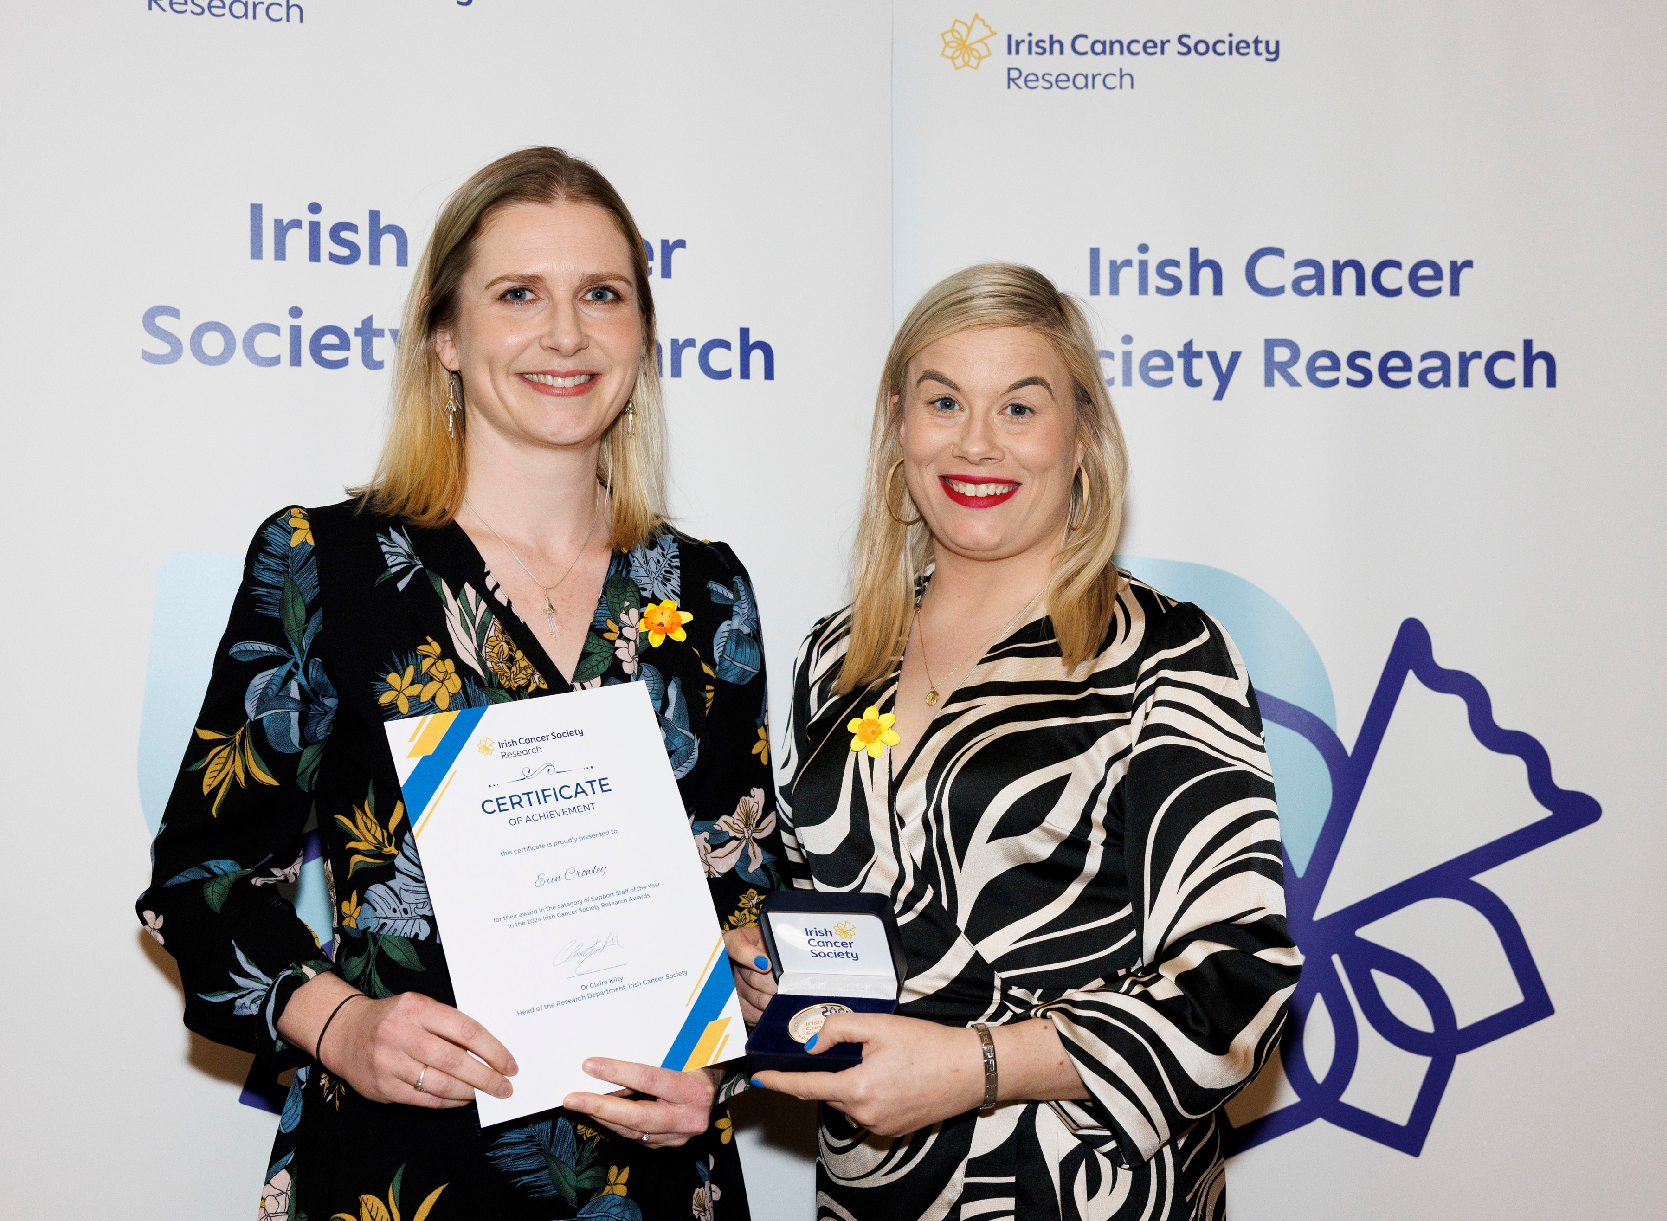 Dr Erin Crowley wins Support Staff of the Year Award at Irish Cancer Society Research Awards